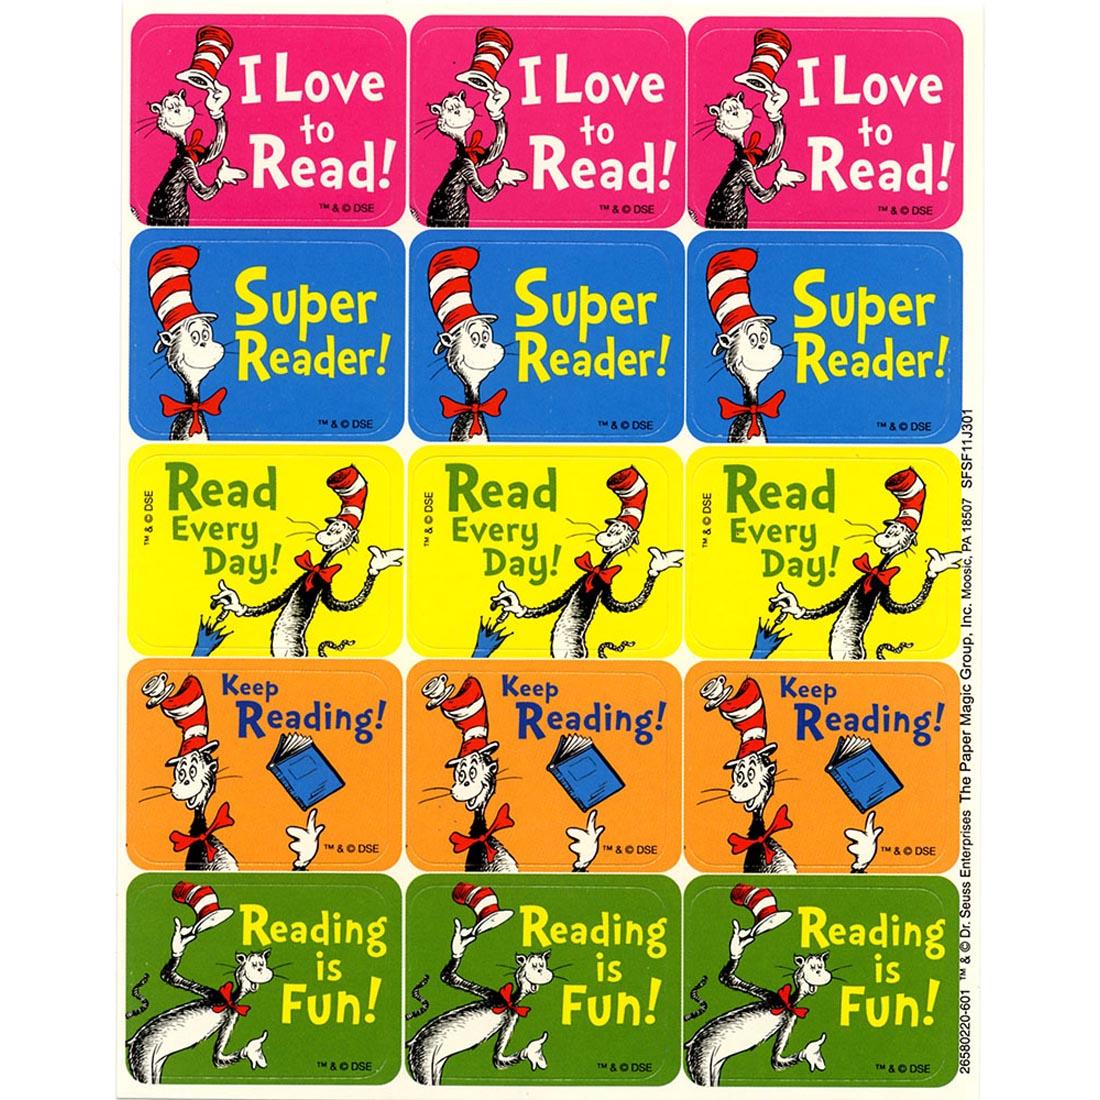 Dr. Seuss The Cat in the Hat Success Stickers by Eureka with the messages I Love to Read, Super Reader, Read Every Day, Keep Reading, Reading is Fun